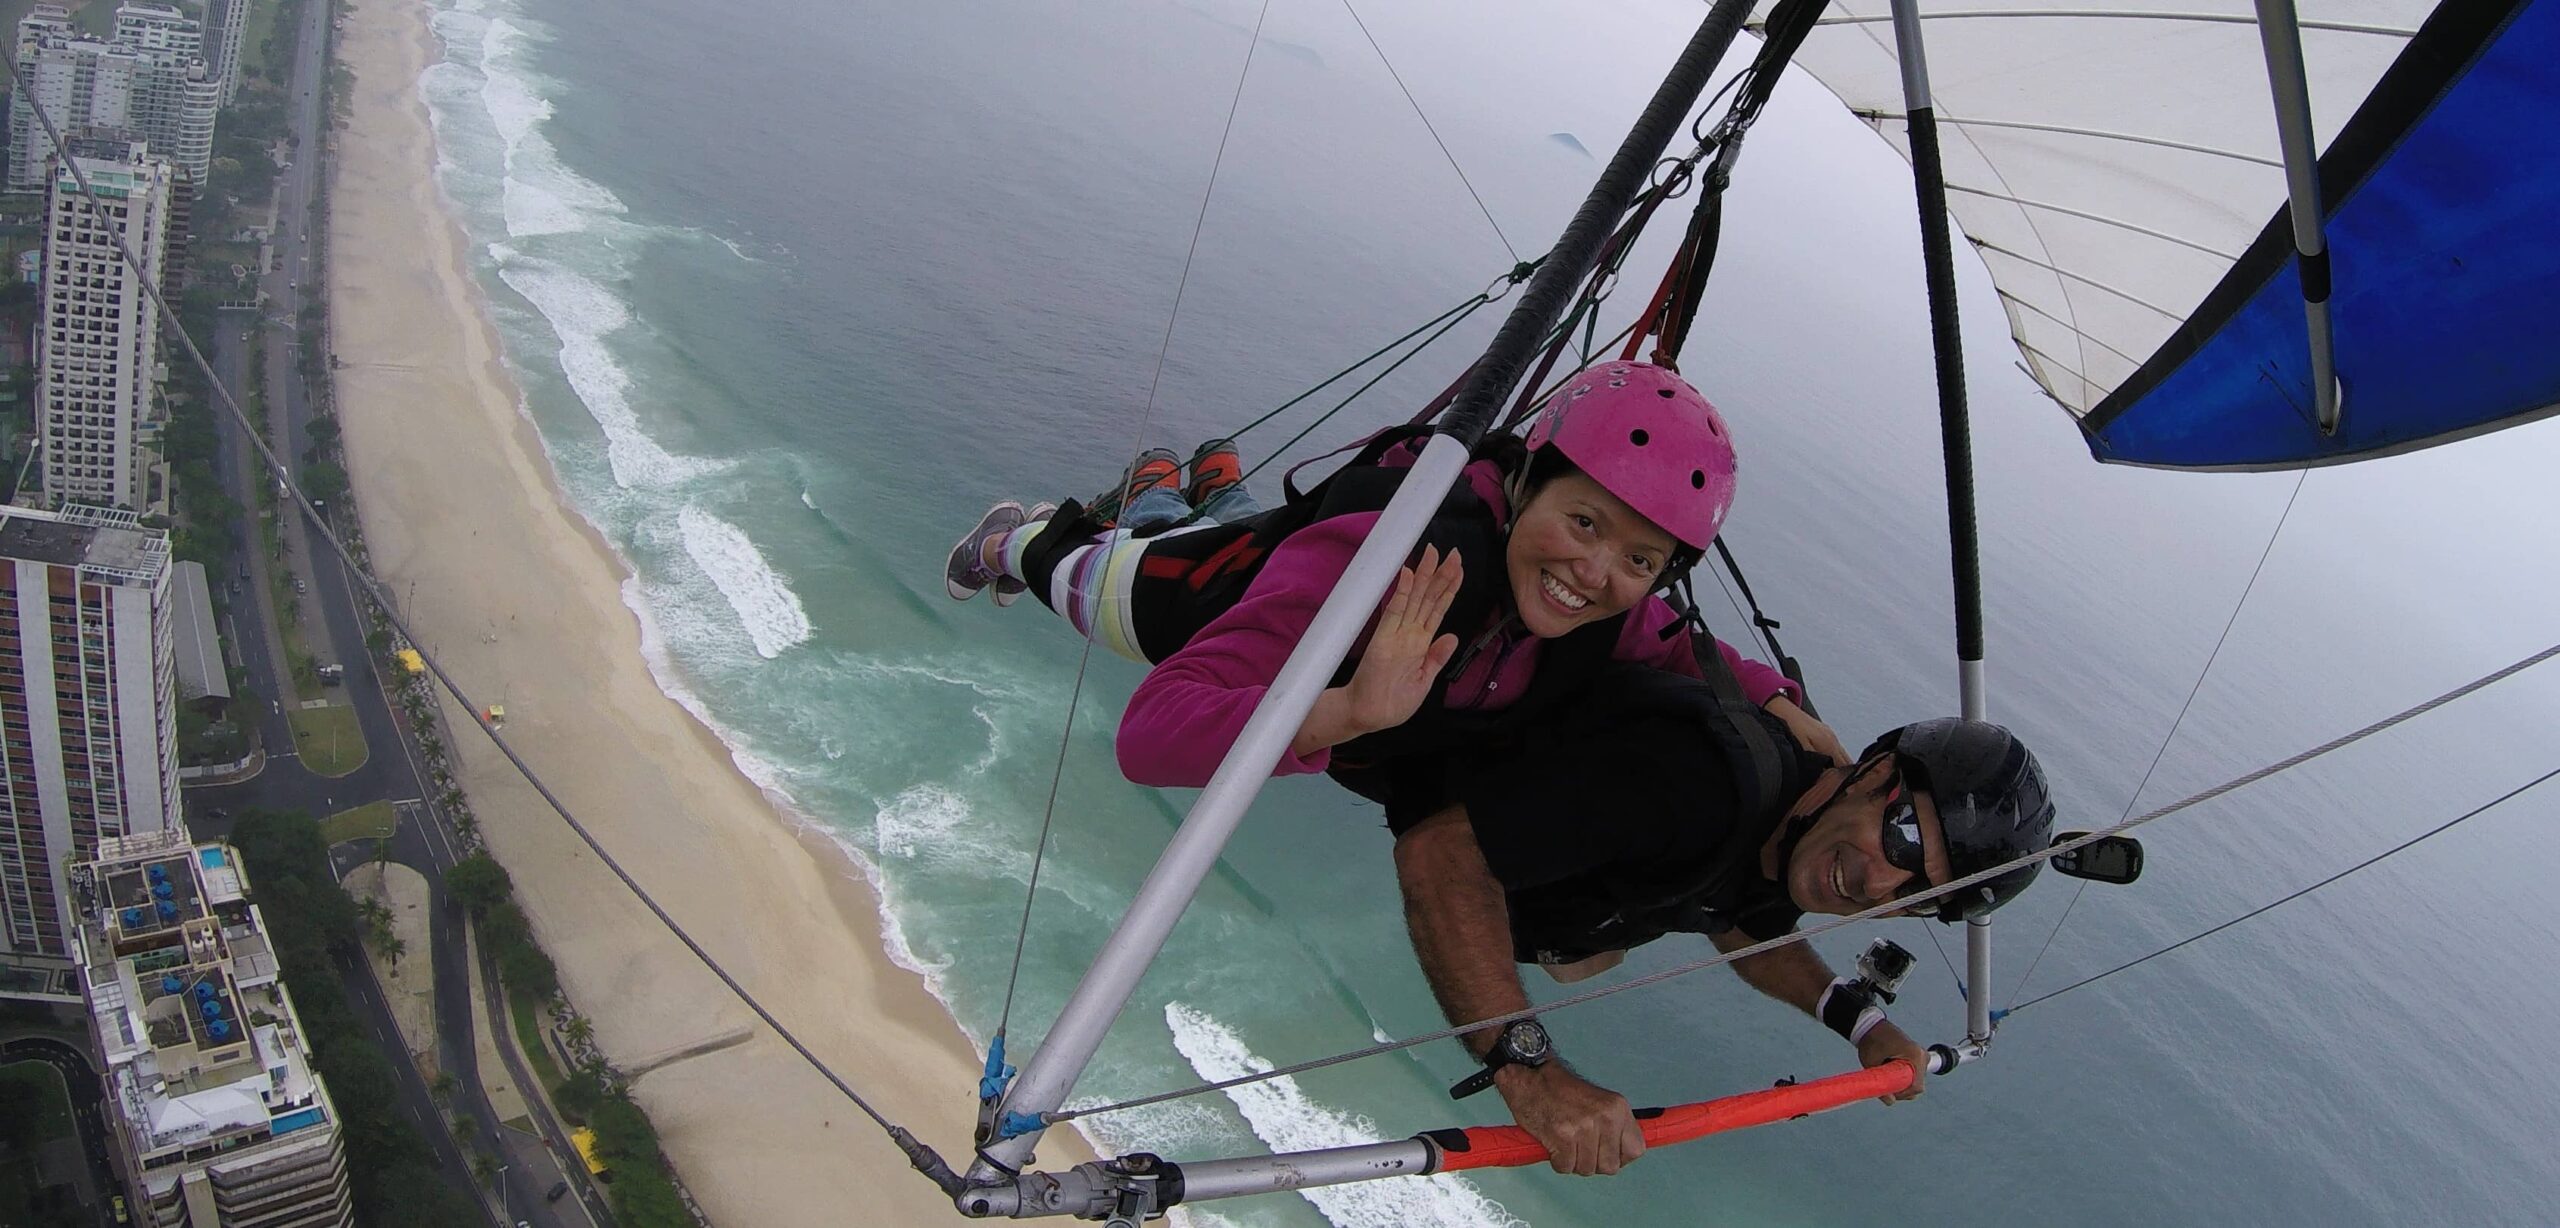 Rio_Hang_Gliding_with_Manny-scaled.jpg